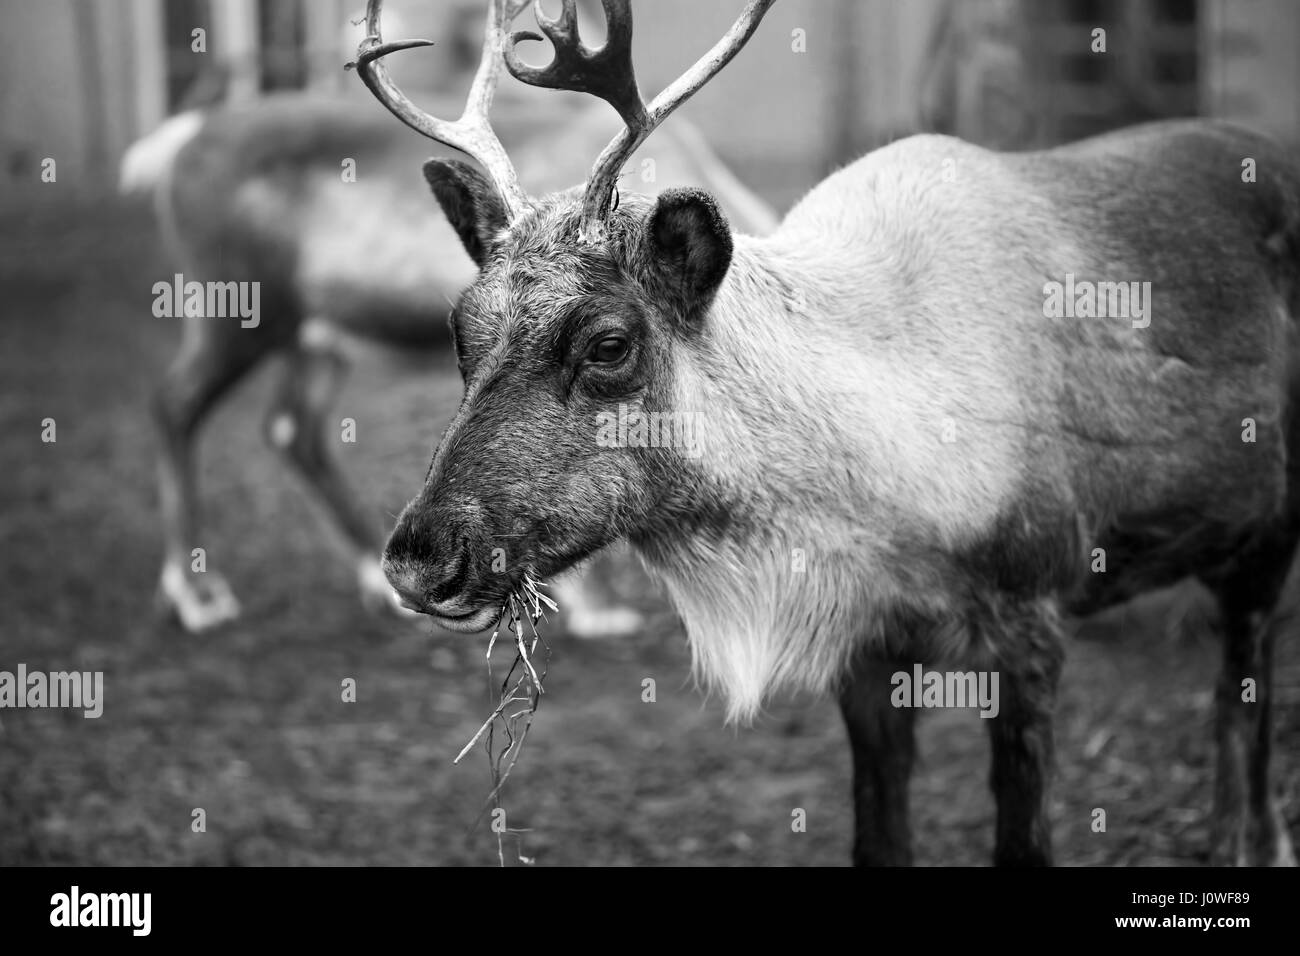 Black and white image of reindeer eating Stock Photo